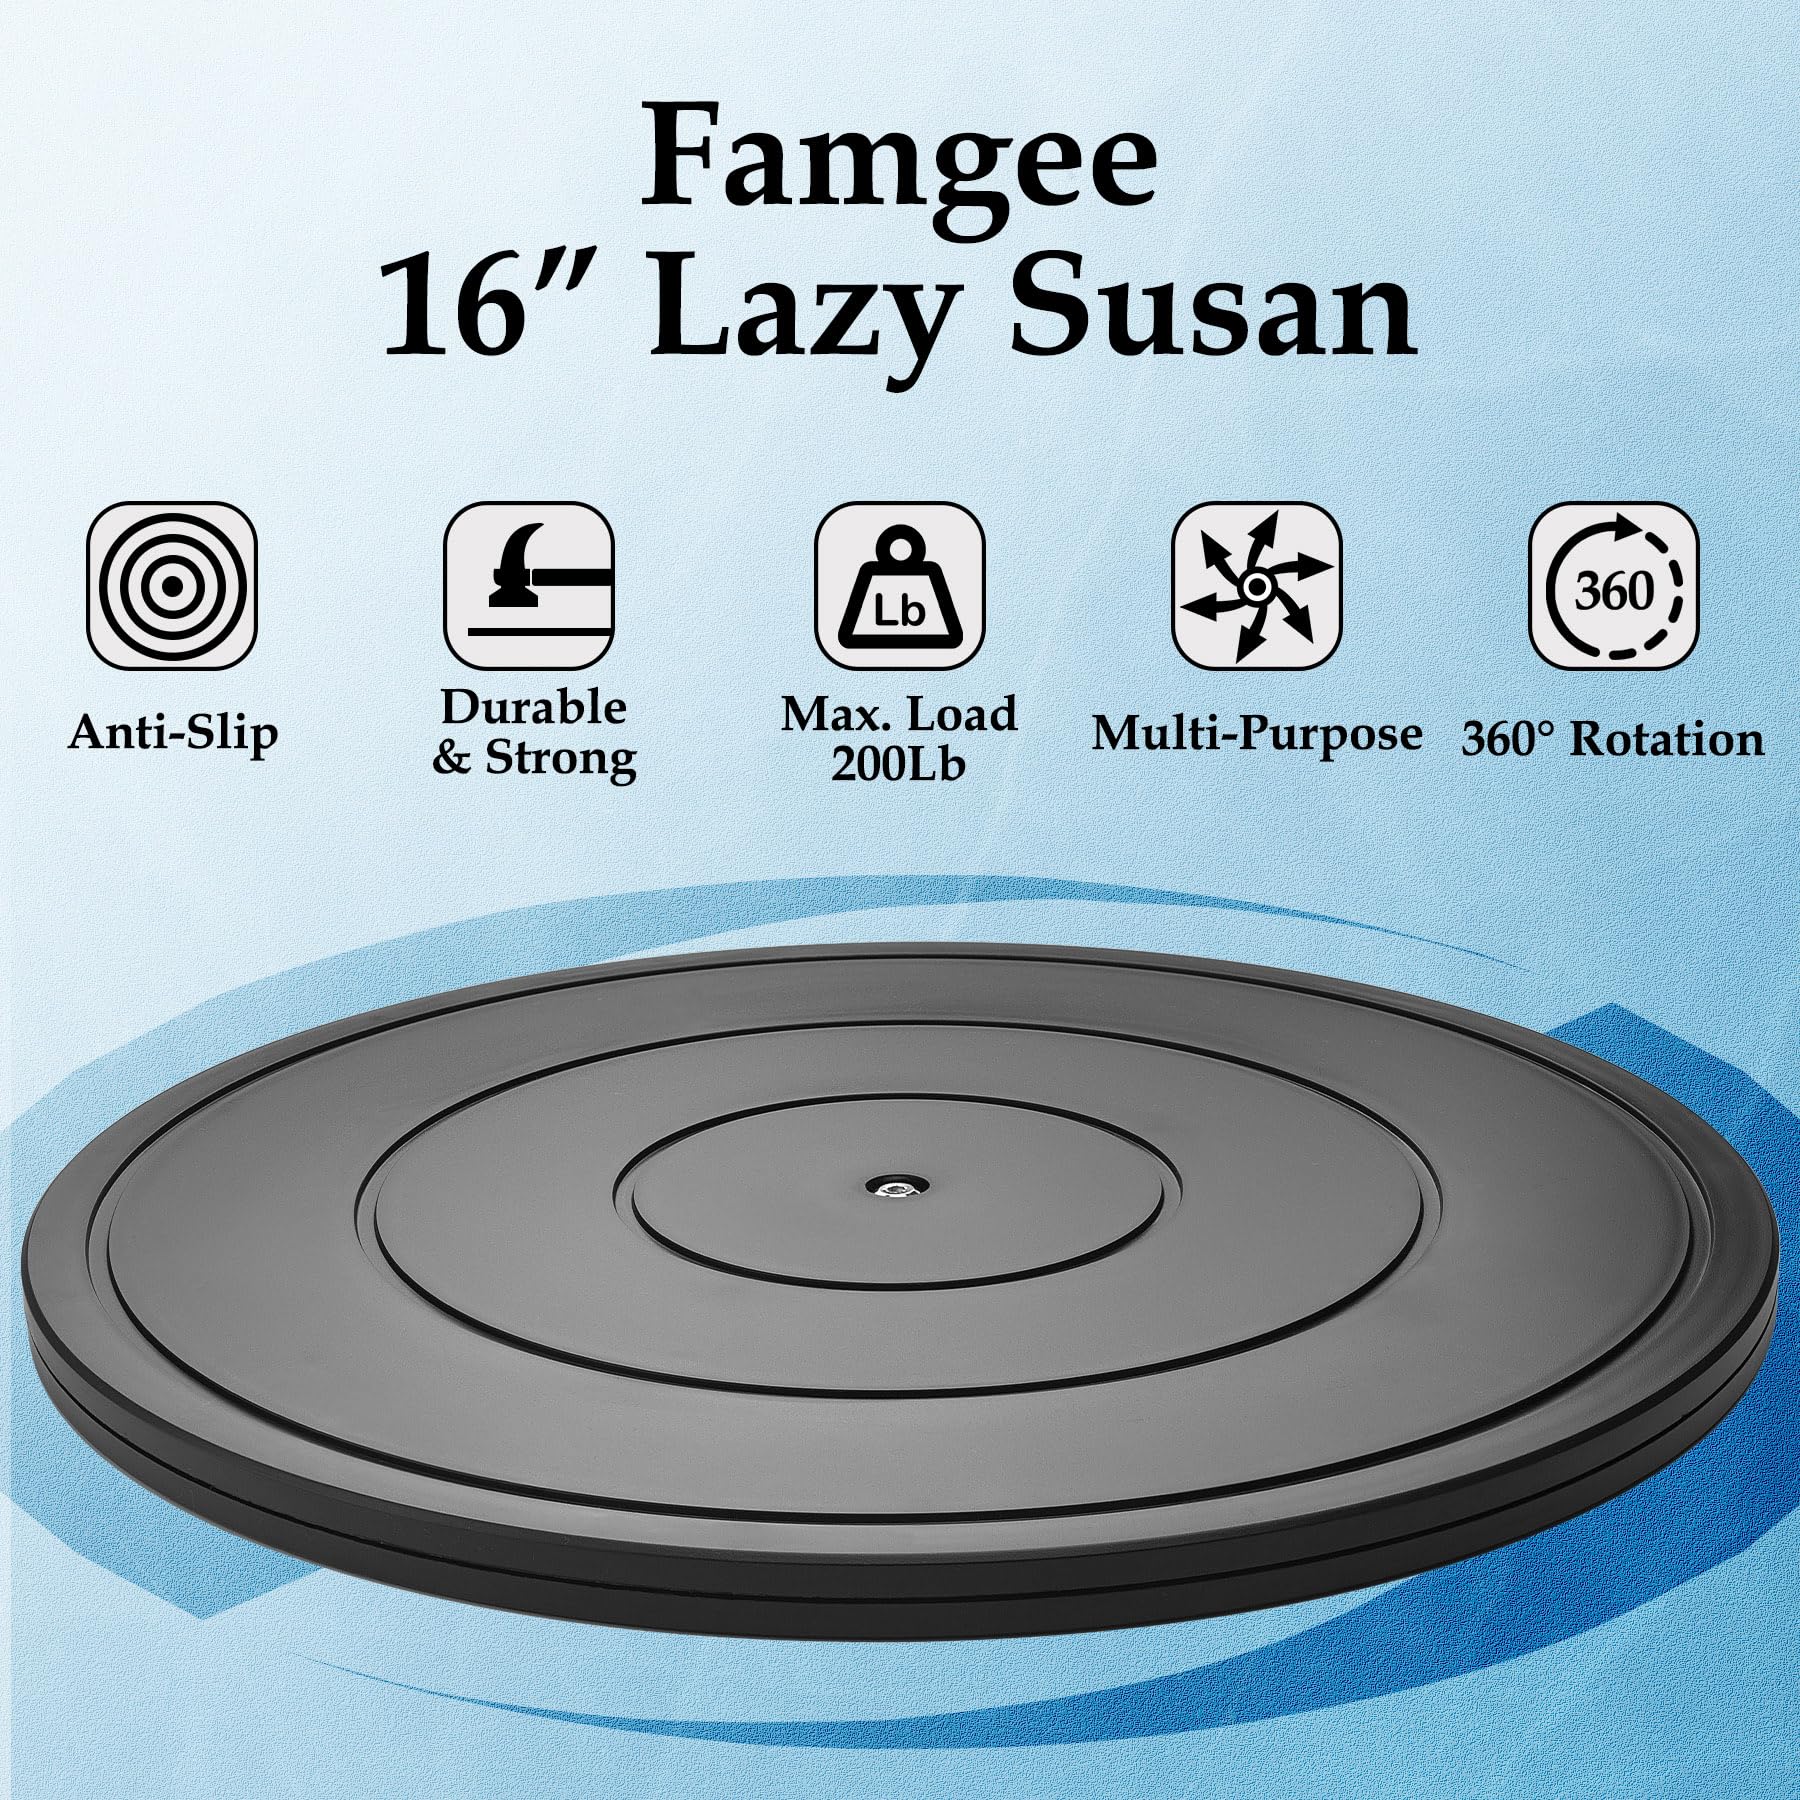 Famgee 16 Inch Lazy Susan Turntable Heavy Duty Rotating Swivel Stand Lazy Susan with Steel Ball Bearings for Flat Panel Monitors, Computer, TV, Speakers, Bonsai, Statue, Cabinet Organizer